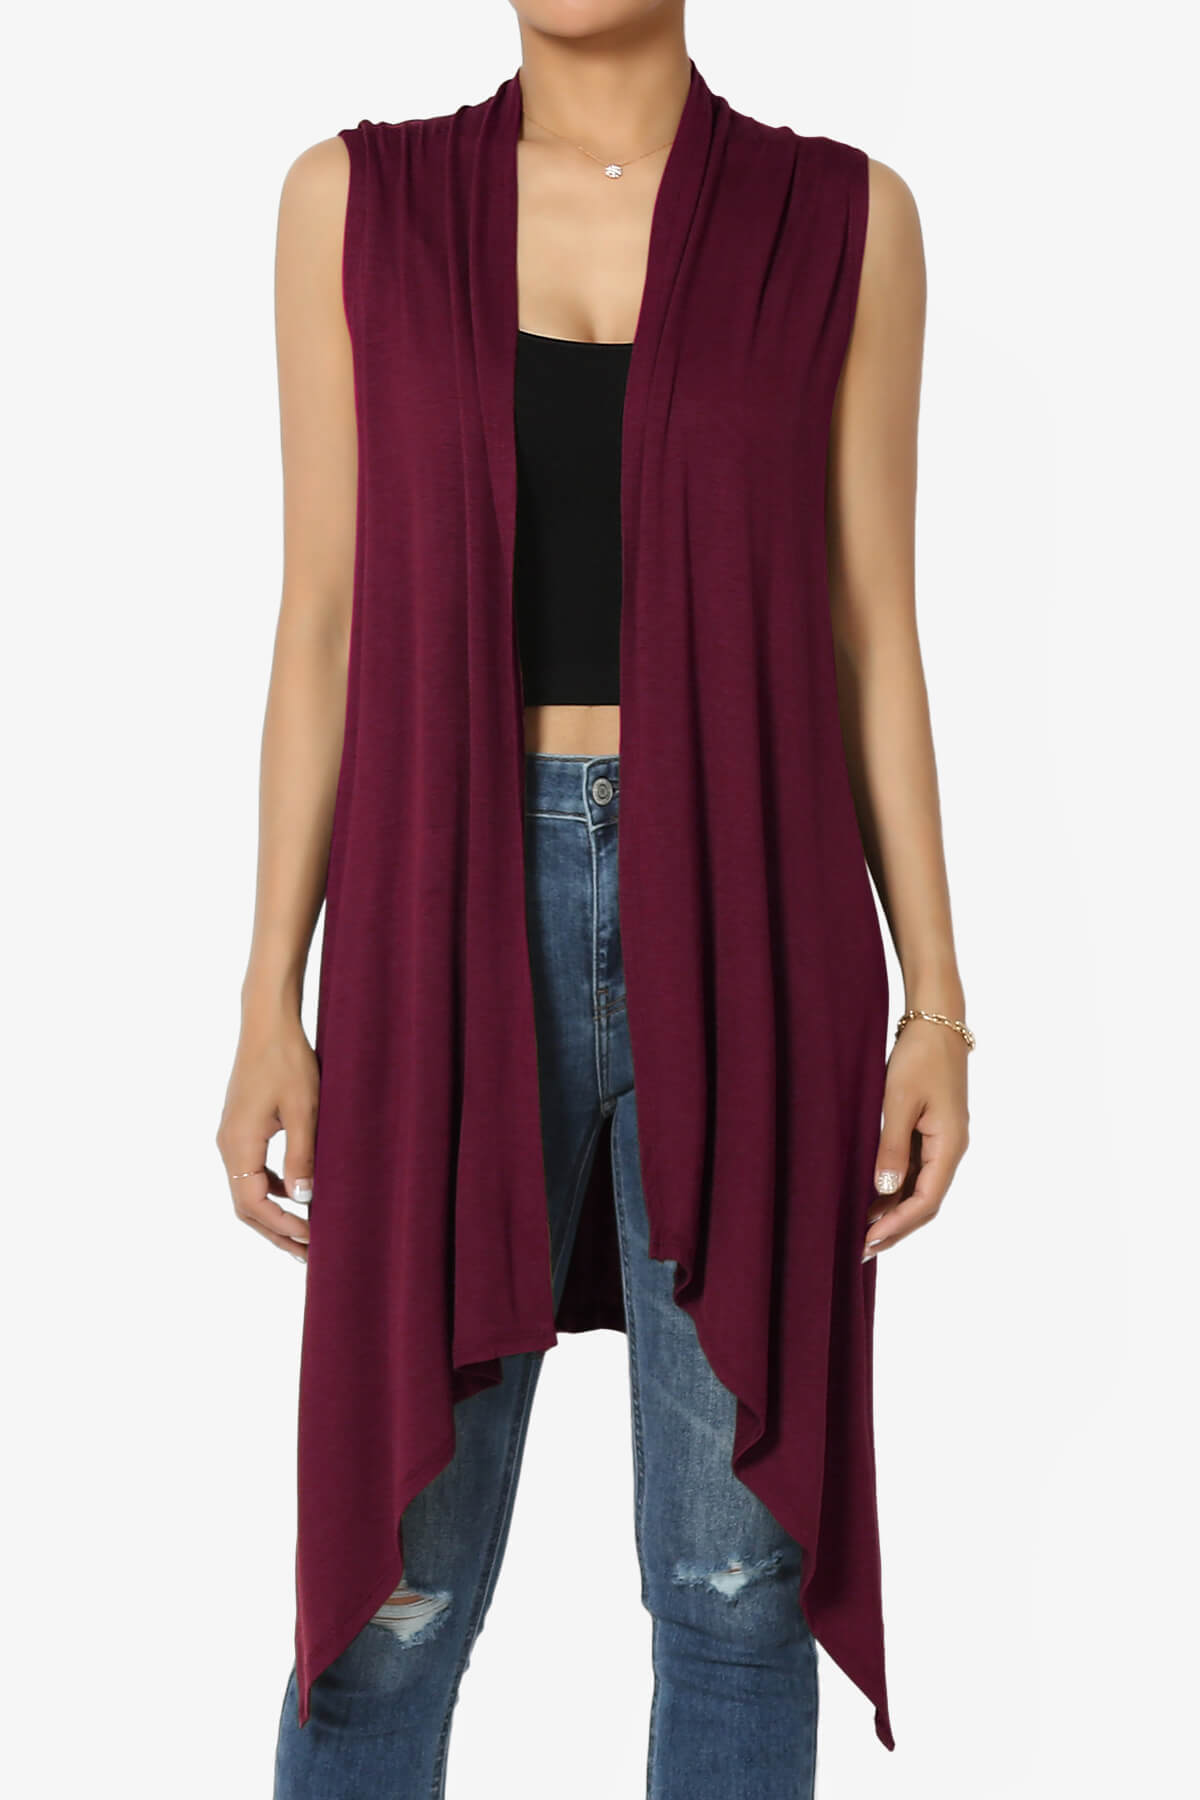 Load image into Gallery viewer, Taysom Draped Open Front Sleeveless Cardigan Vest DARK BURGUNDY_1
